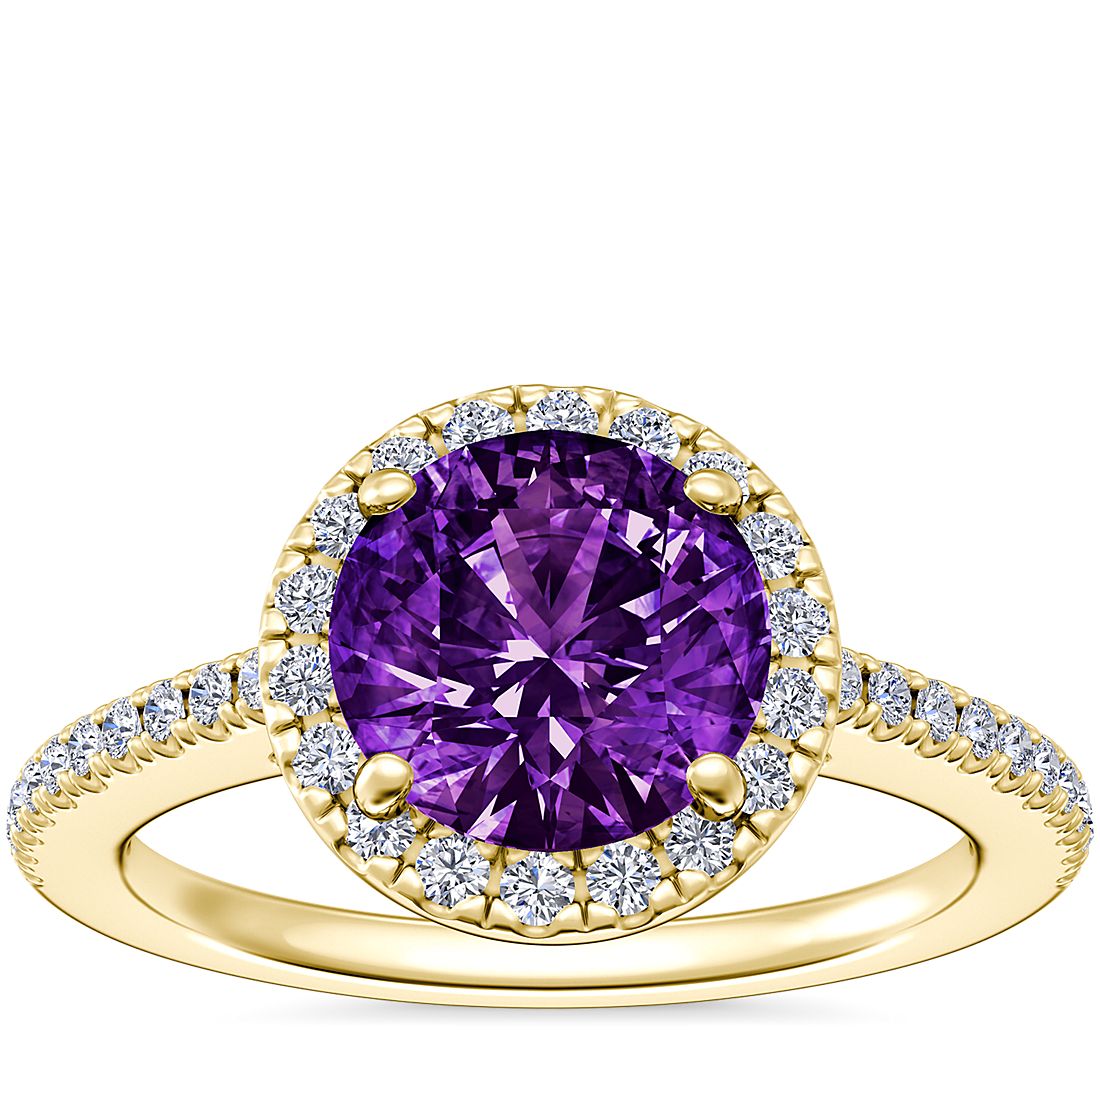 Classic Halo Diamond Engagement Ring with Round Amethyst in 14k Yellow Gold (8mm)